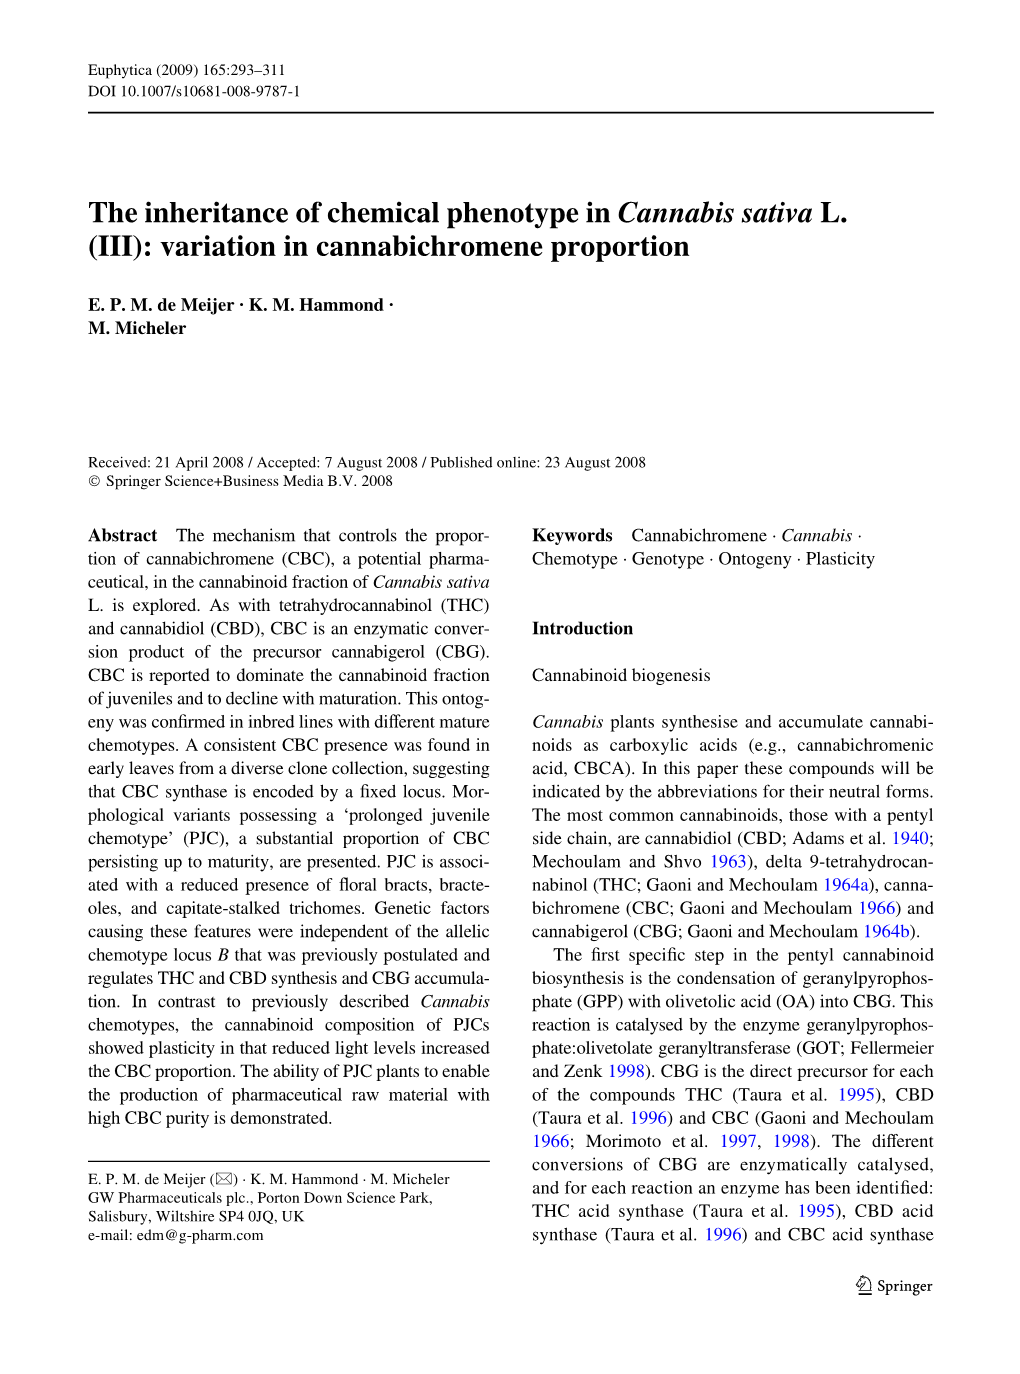 The Inheritance of Chemical Phenotype in Cannabis Sativa L